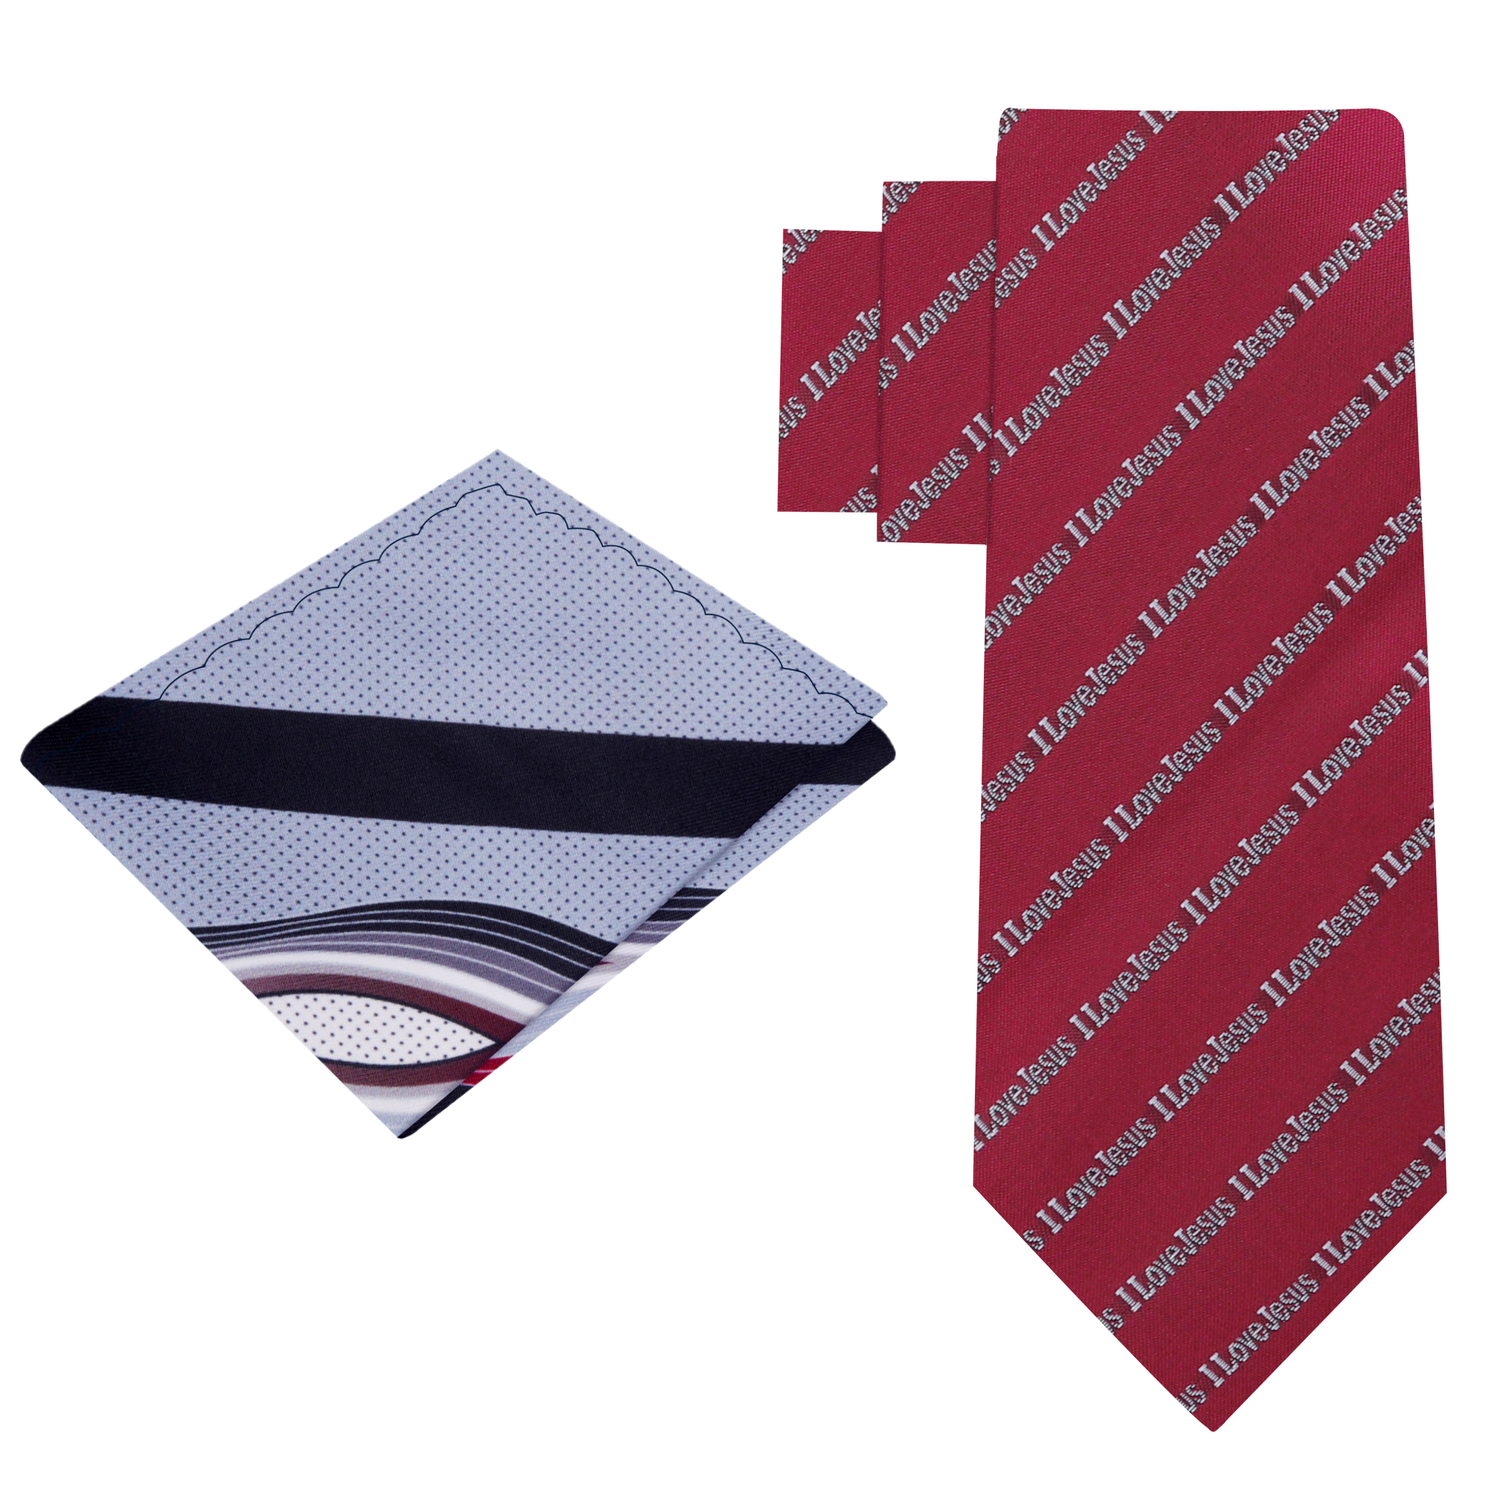 Alt view: Carmine Red, Grey I love Jesus Tie and Abstract Black, Grey, Red Square